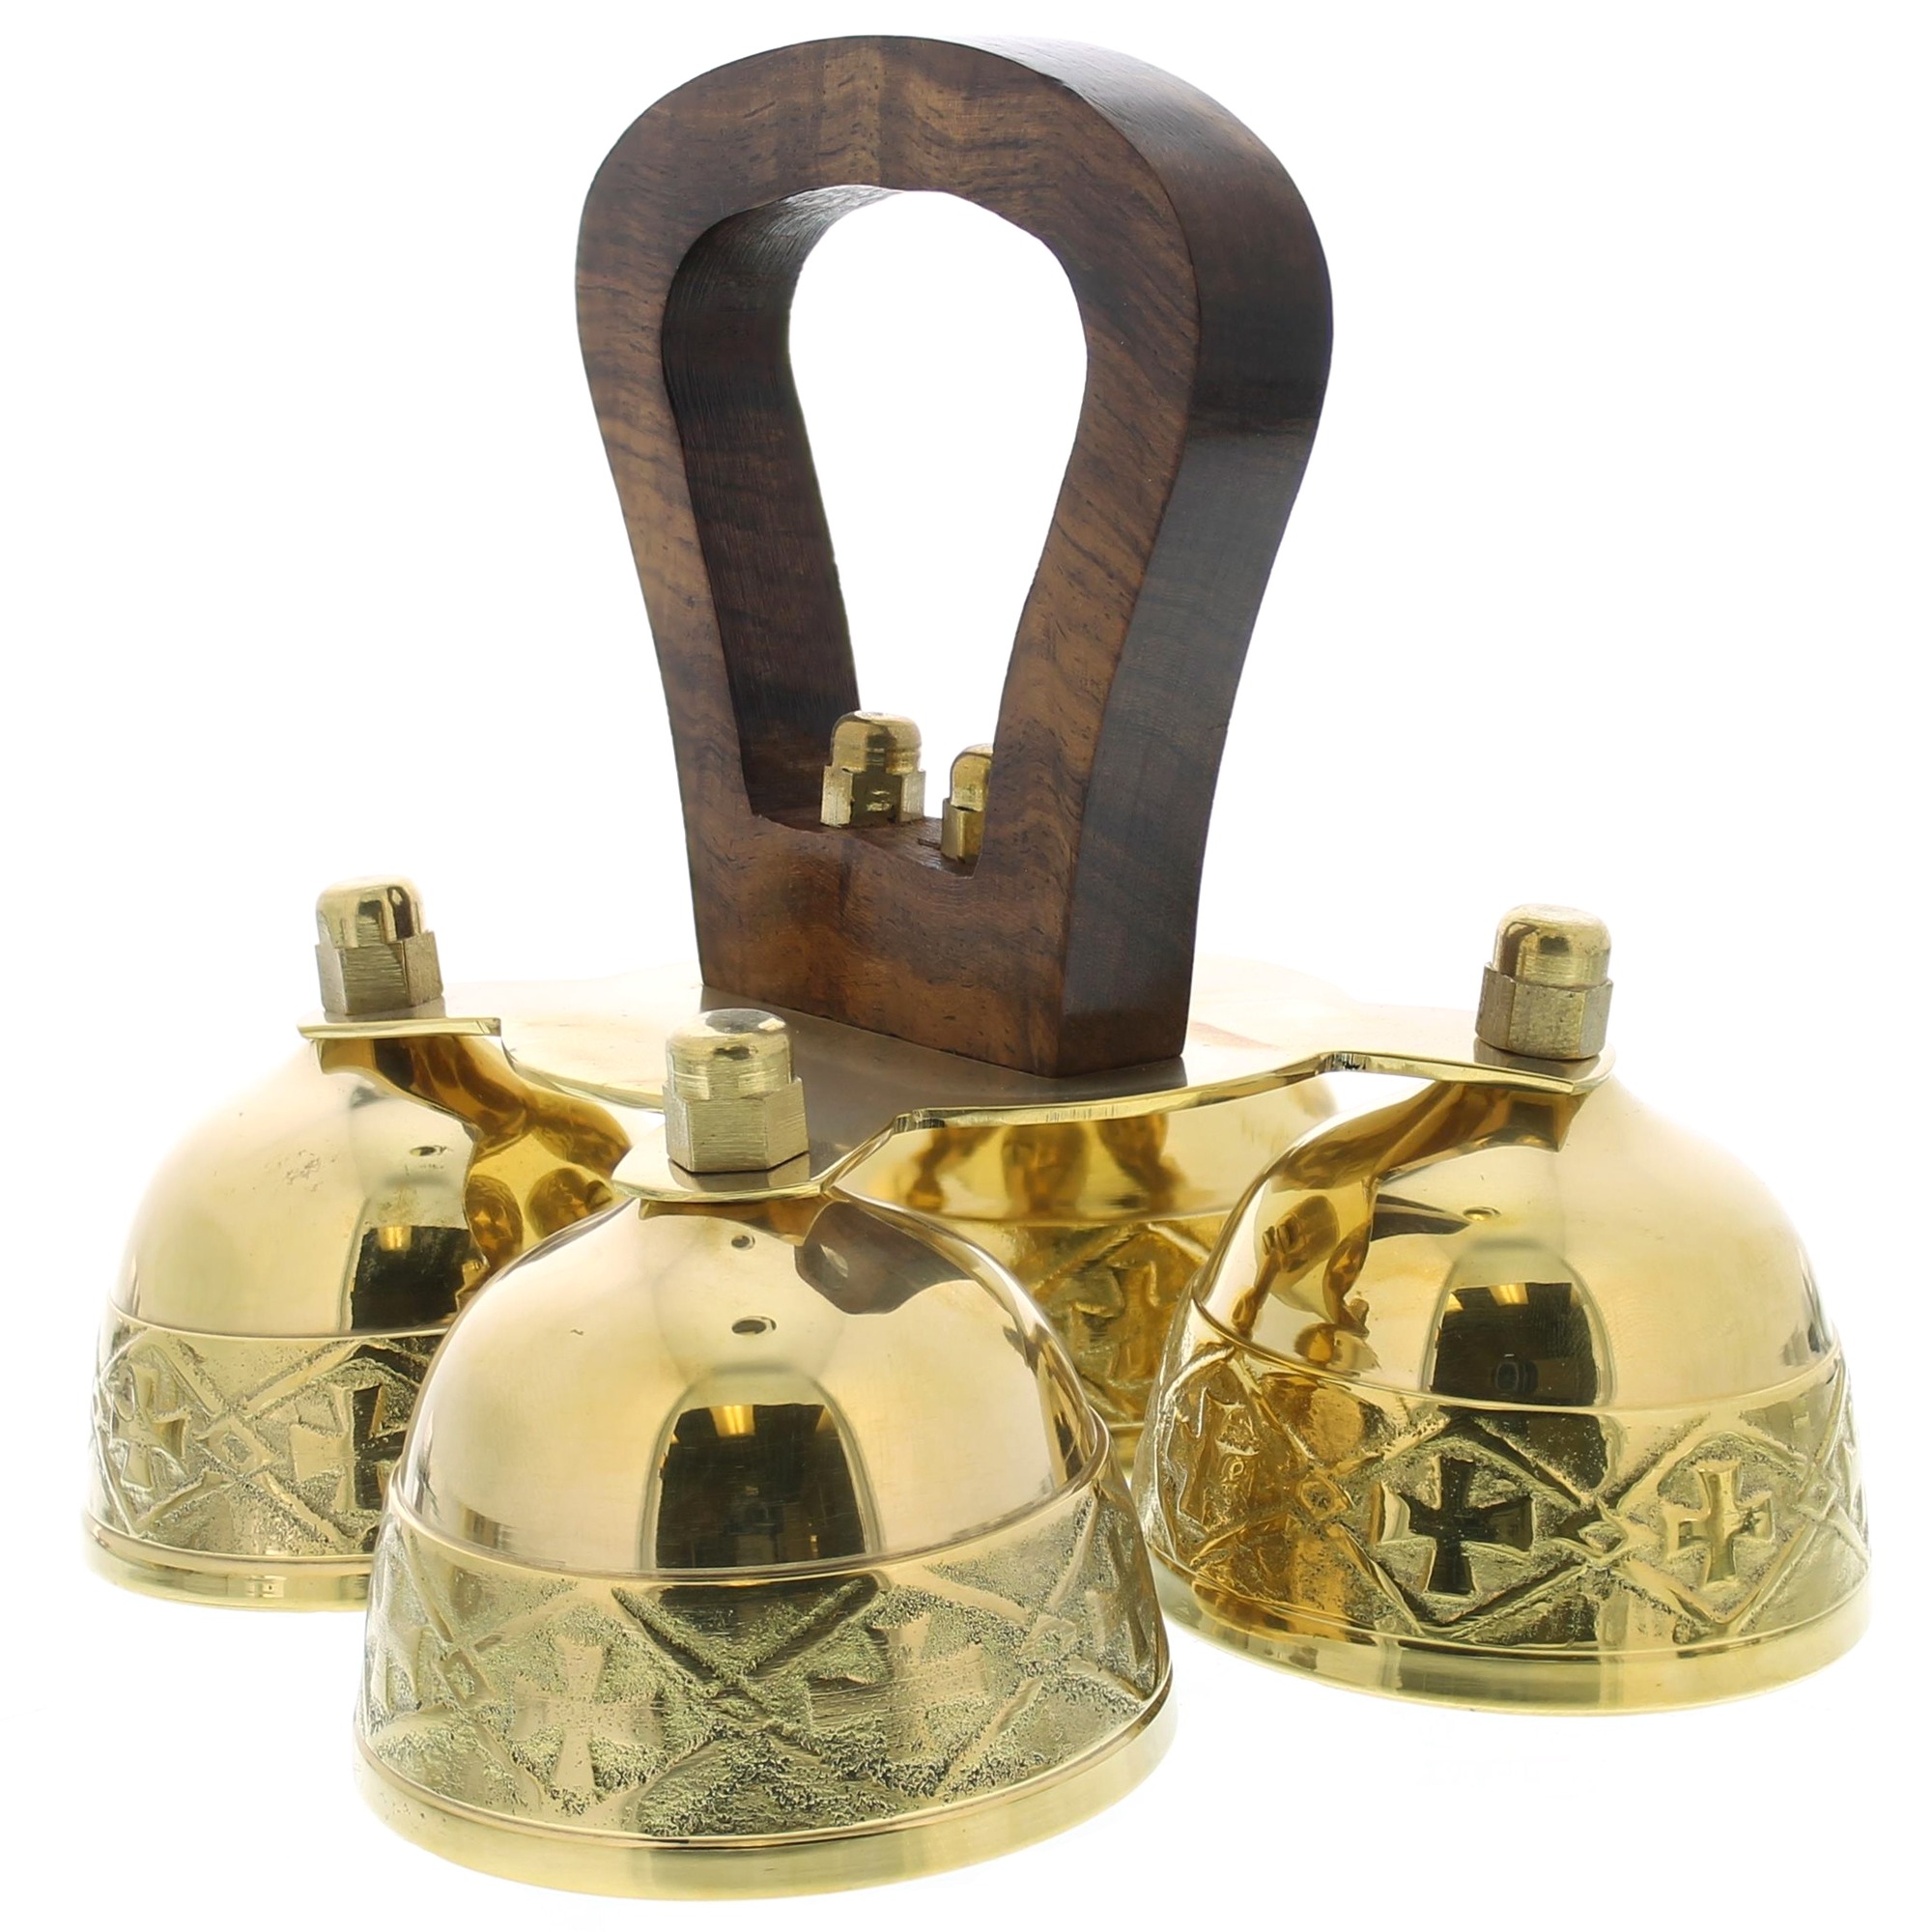 Liturgical bell 4 tons brass and wood handle